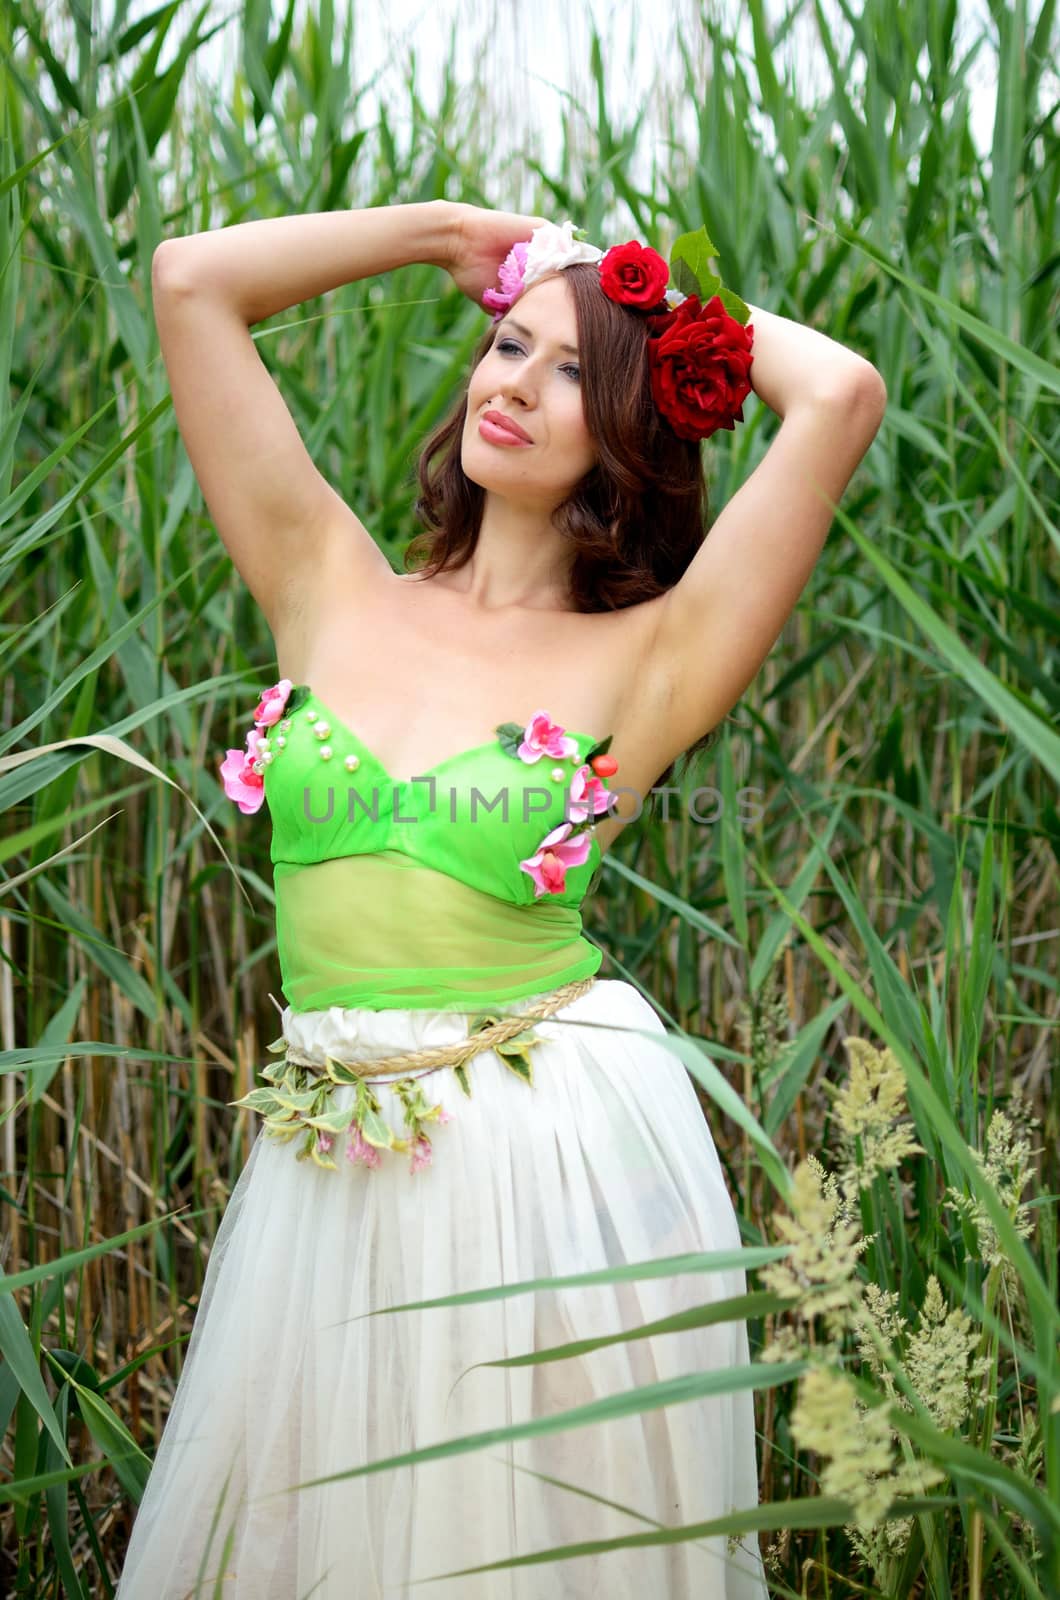 Female model from Poland posing near the lake, surrounded by reeds. Woman wearing flowers' wreath, colorful dress. Chestnut hair color.